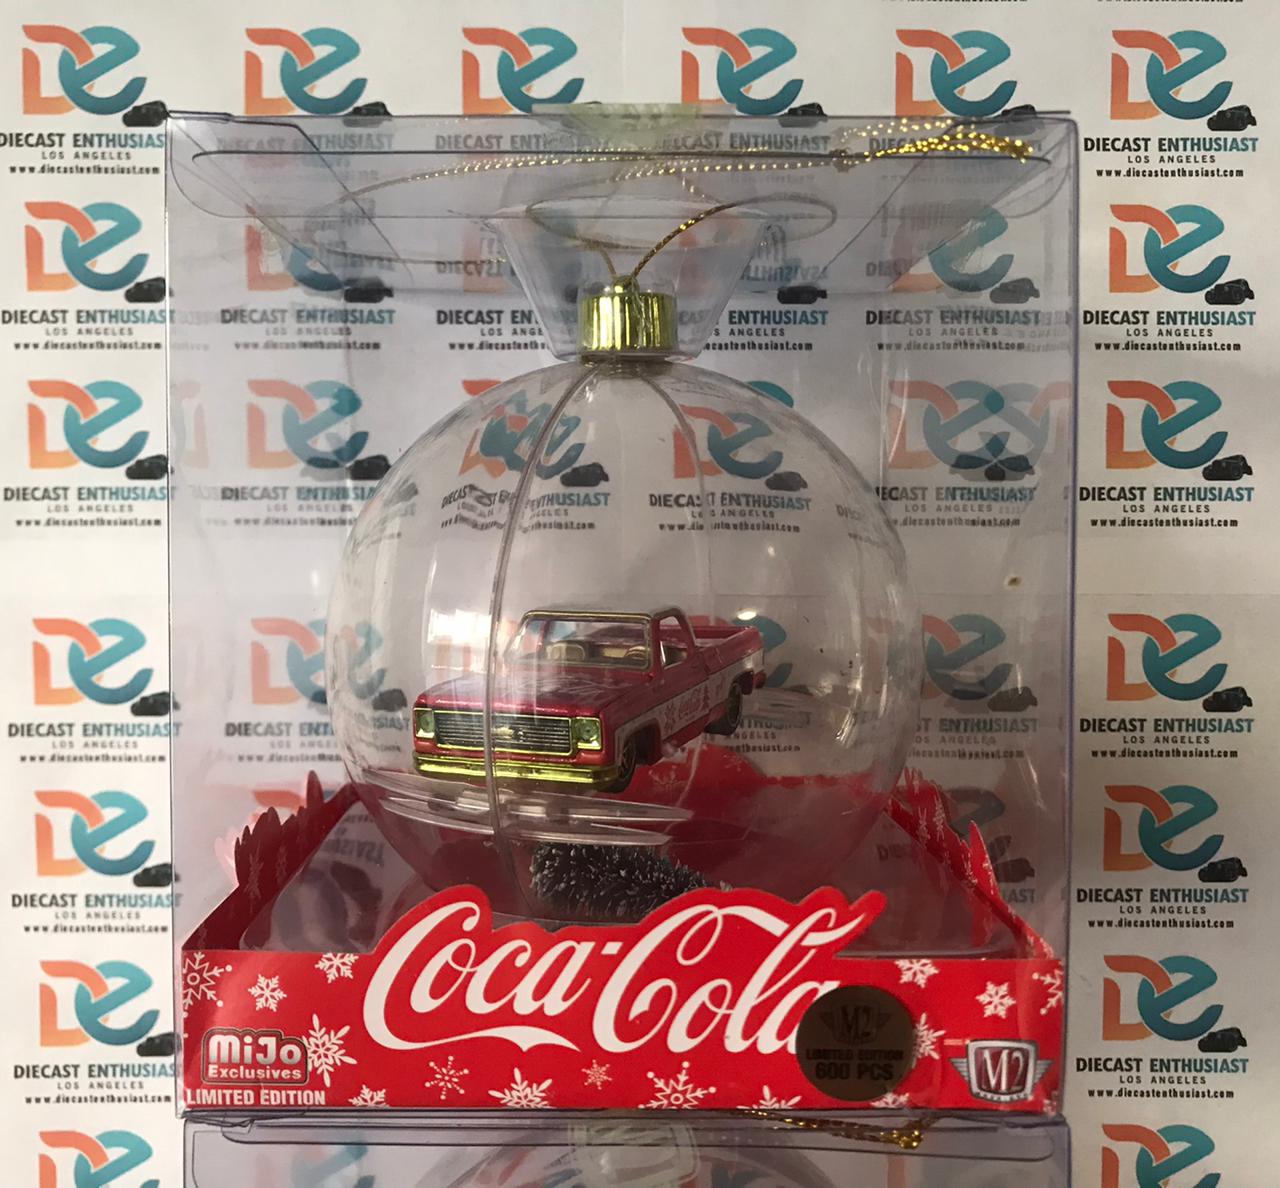 CHASE M2 Machines Mijo Exclusives Coca Cola Ornament 1973 Chevrolet Fleetline with Tree Christmas 1:64